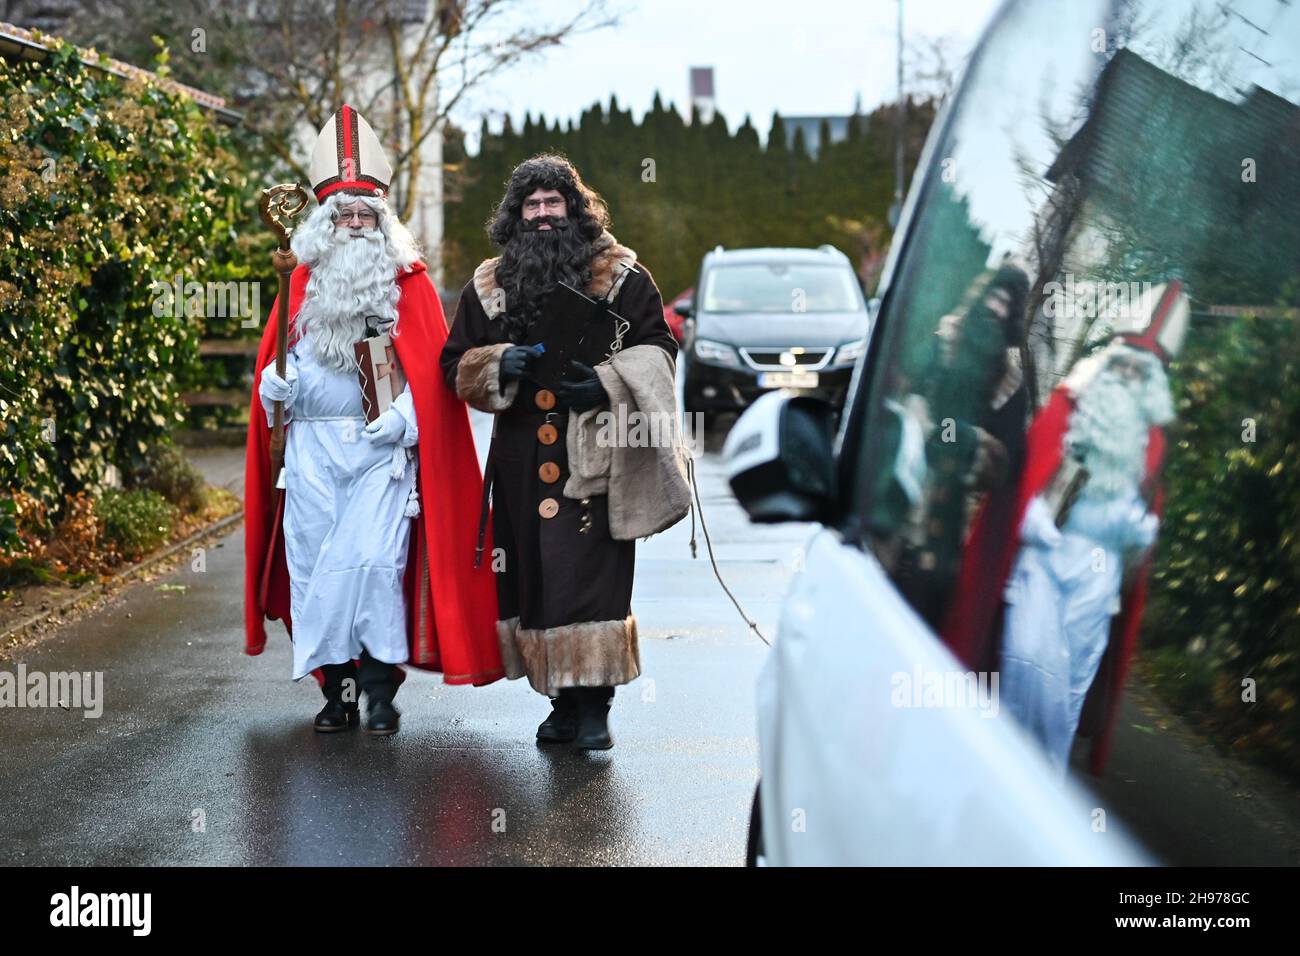 Friedrichshafen, Germany. 04th Dec, 2021. Dressed as St. Nicholas and his servant Ruprecht, Erich Schwarz (in red and with mitre) and Michael Huber (Ruprecht) come to the Herold family from Ailingen near Friedrichshafen. The two actors belong to the St. Nicholas Guild of Friedrichshafen, which wants to preserve the tradition of St. Nicholas of Myra. During the visit, the children of two families recite poems and musical pieces, and in return, St. Nicholas and Ruprecht read from their books, giving reprimands and praise. Credit: Felix Kästle/dpa/Alamy Live News Stock Photo